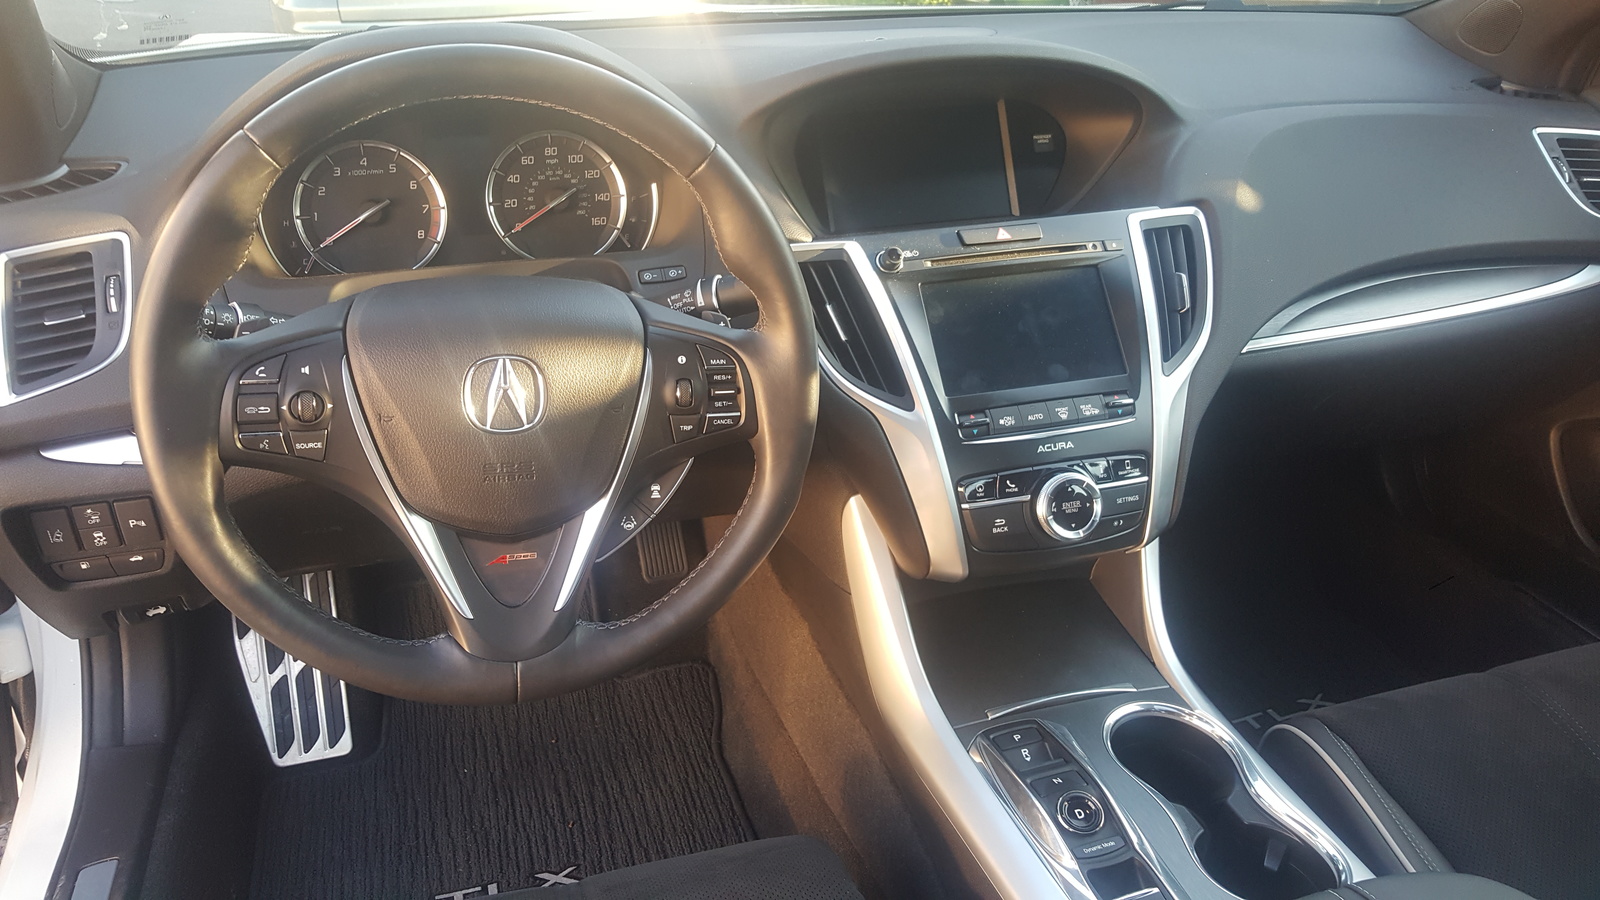 2018 Acura TLX Test Drive Review